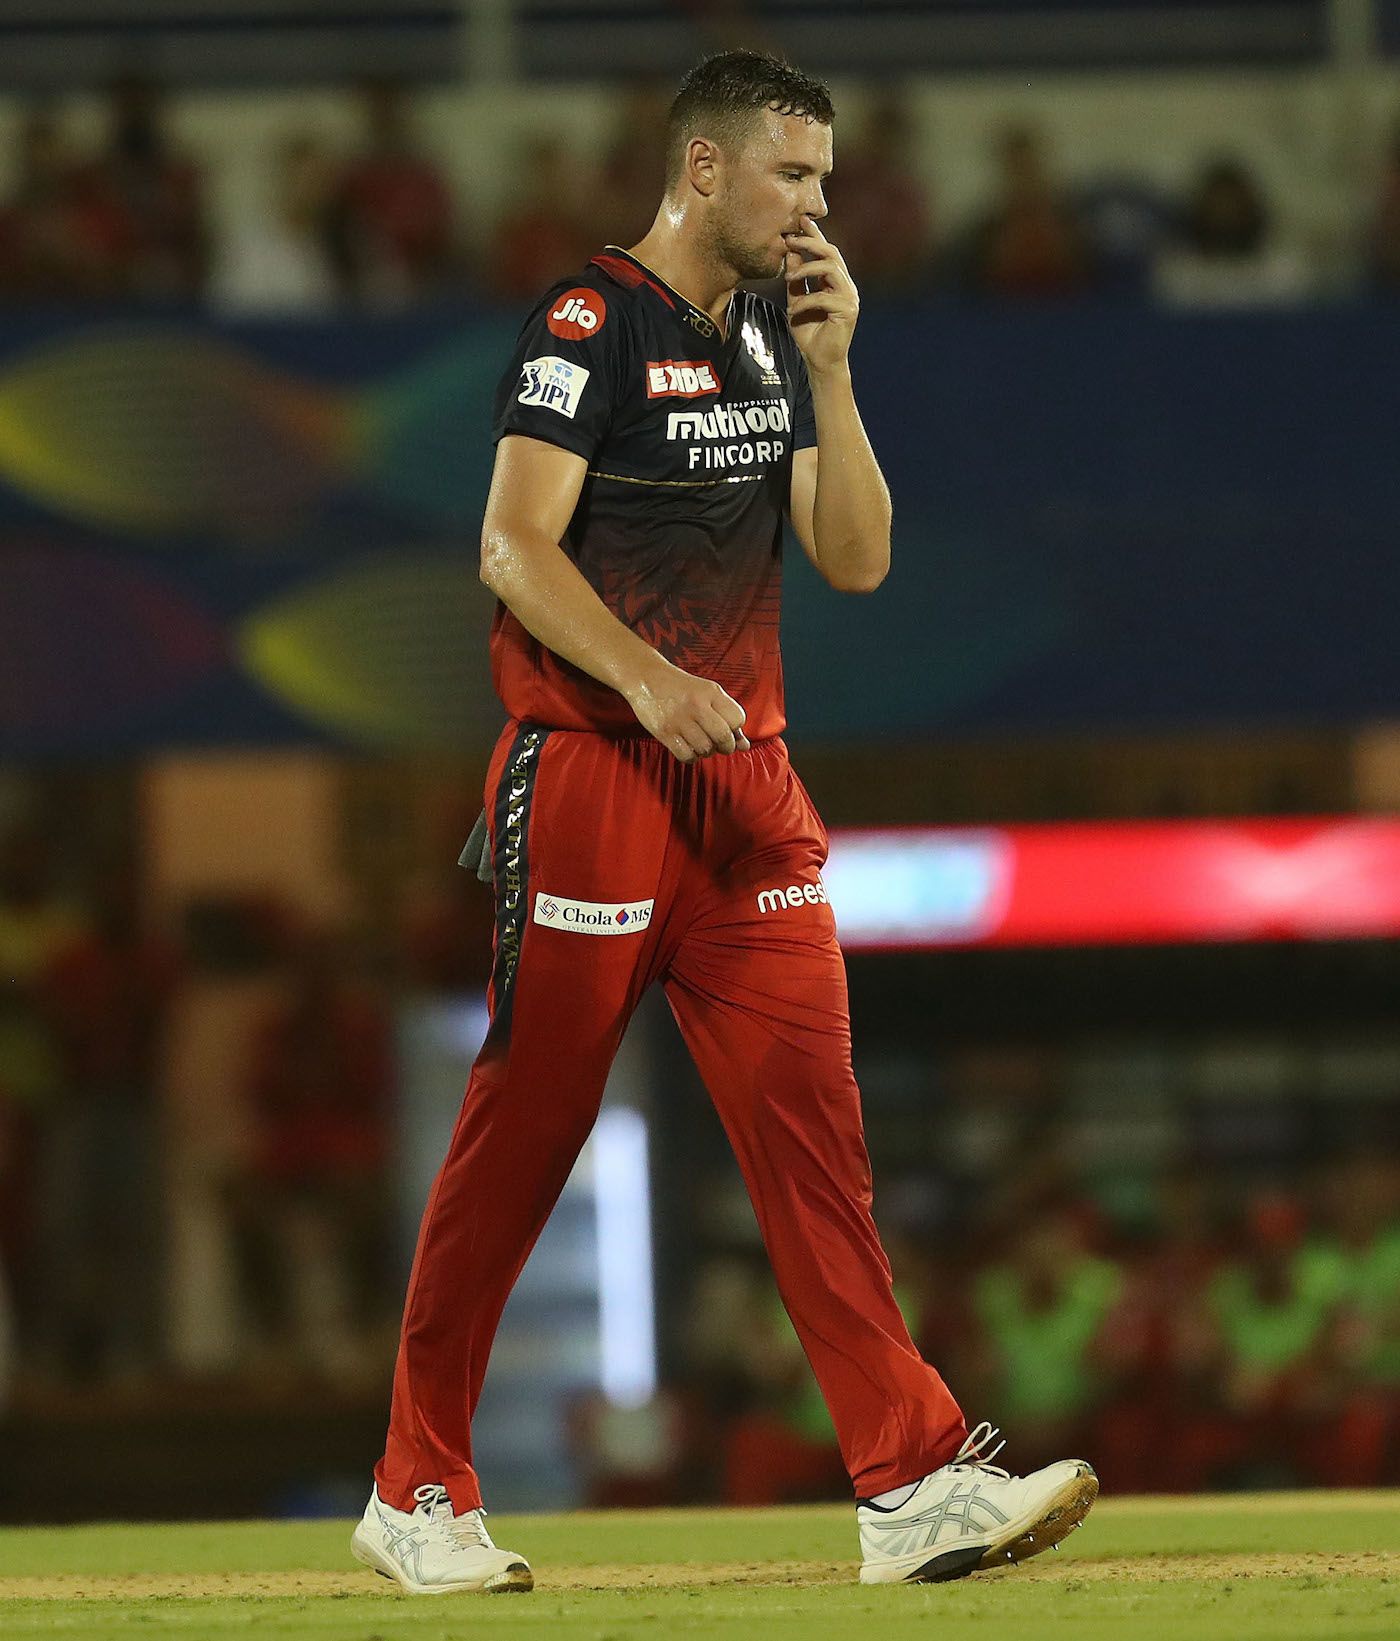 Josh Hazlewood conceded 64 runs in his four wicketless overs joint